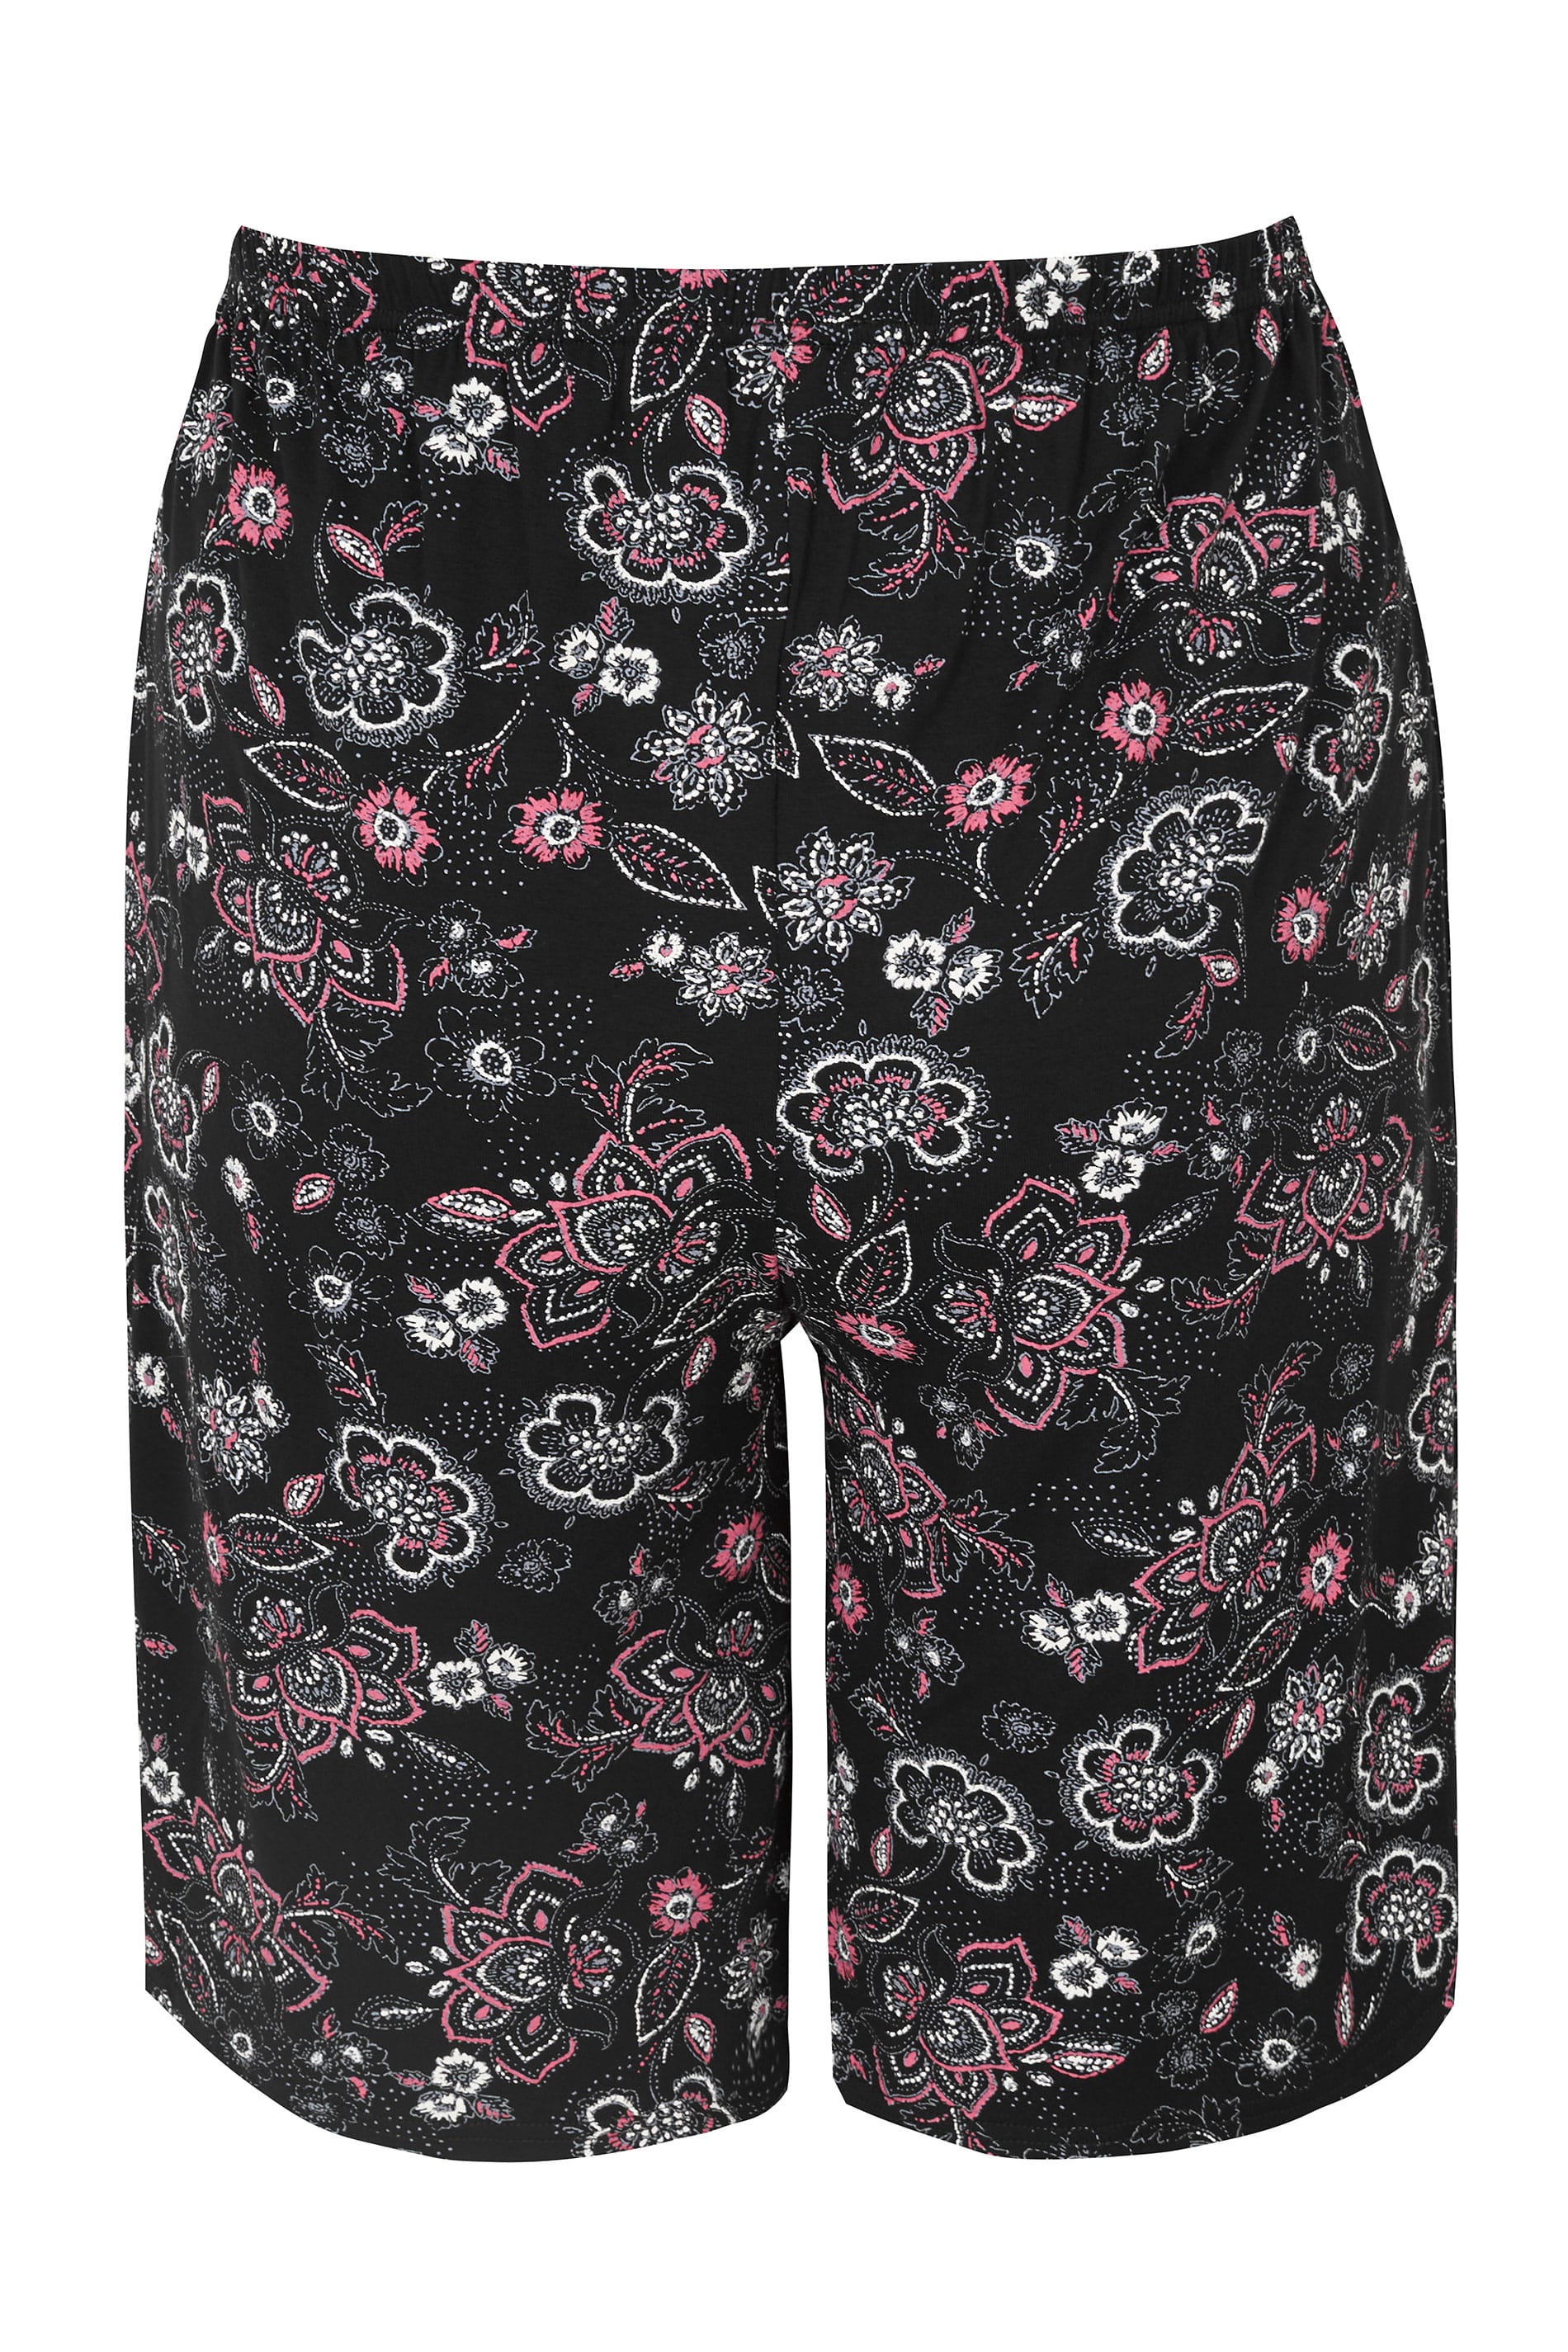 Black & Pink Floral Jersey Shorts, plus size 16 to 36